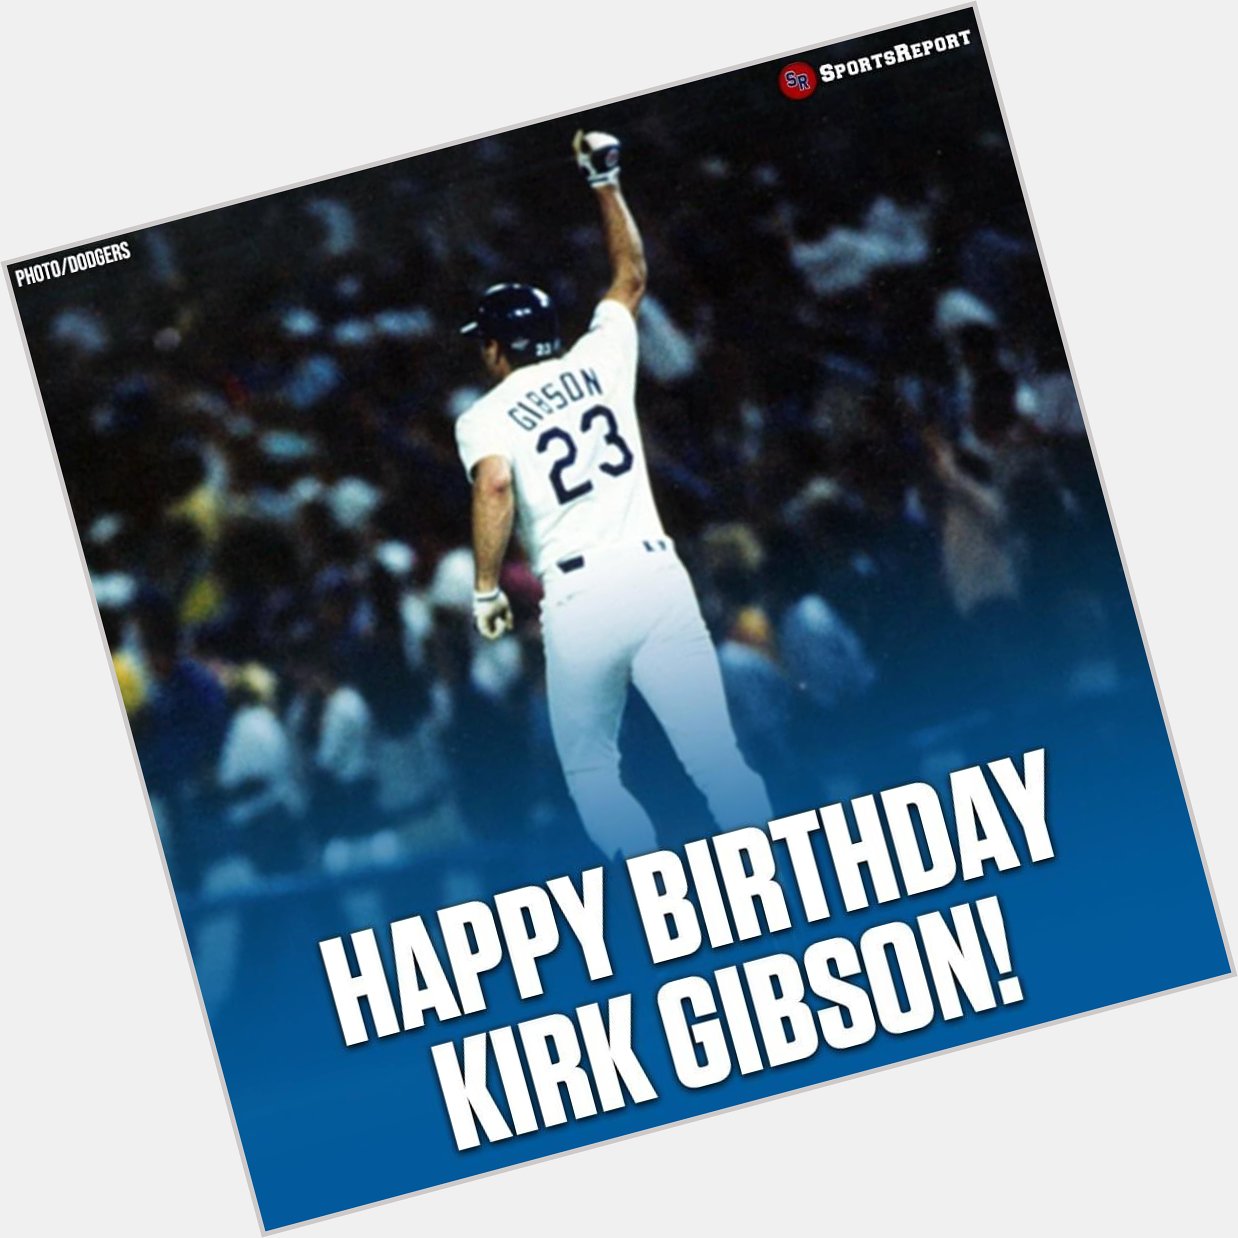 Dodgers Fans, let\s wish Dodgers Legend Kirk Gibson a Happy Birthday!!   